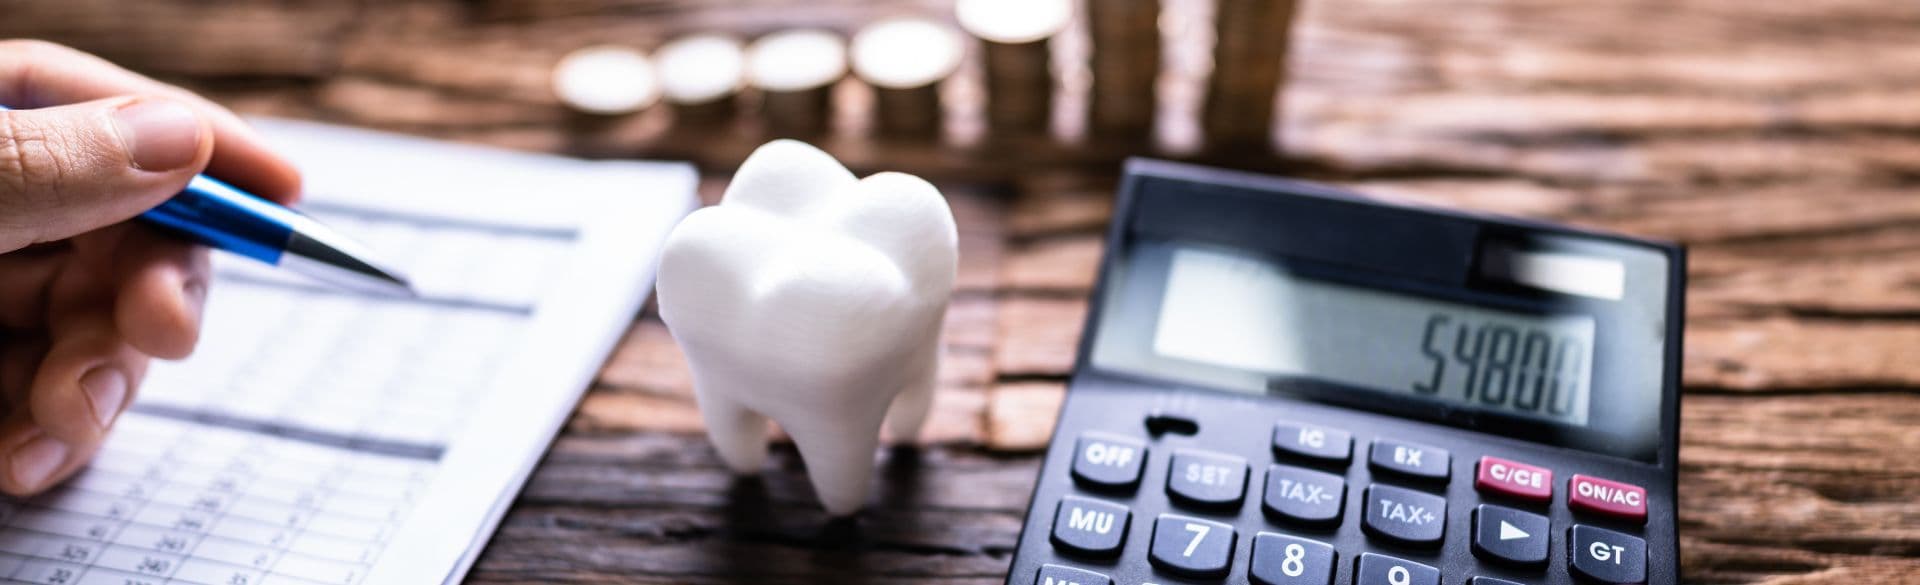 Dental Implant Cost in Mexico